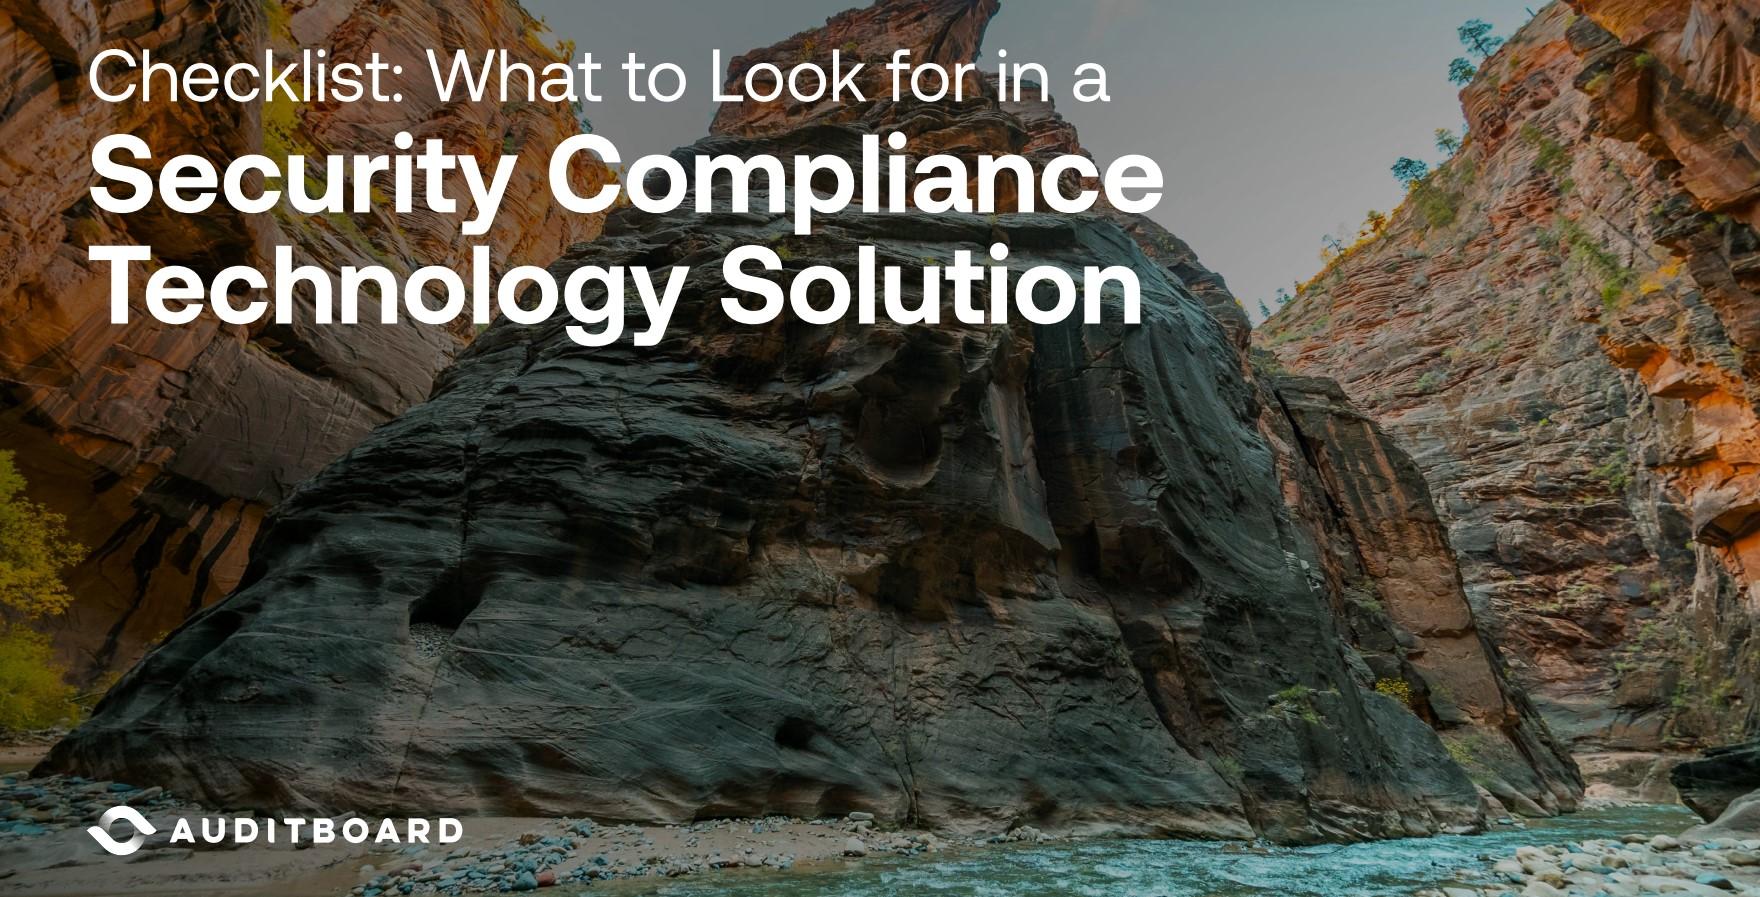 Checklist: How to Choose Security Compliance Technology